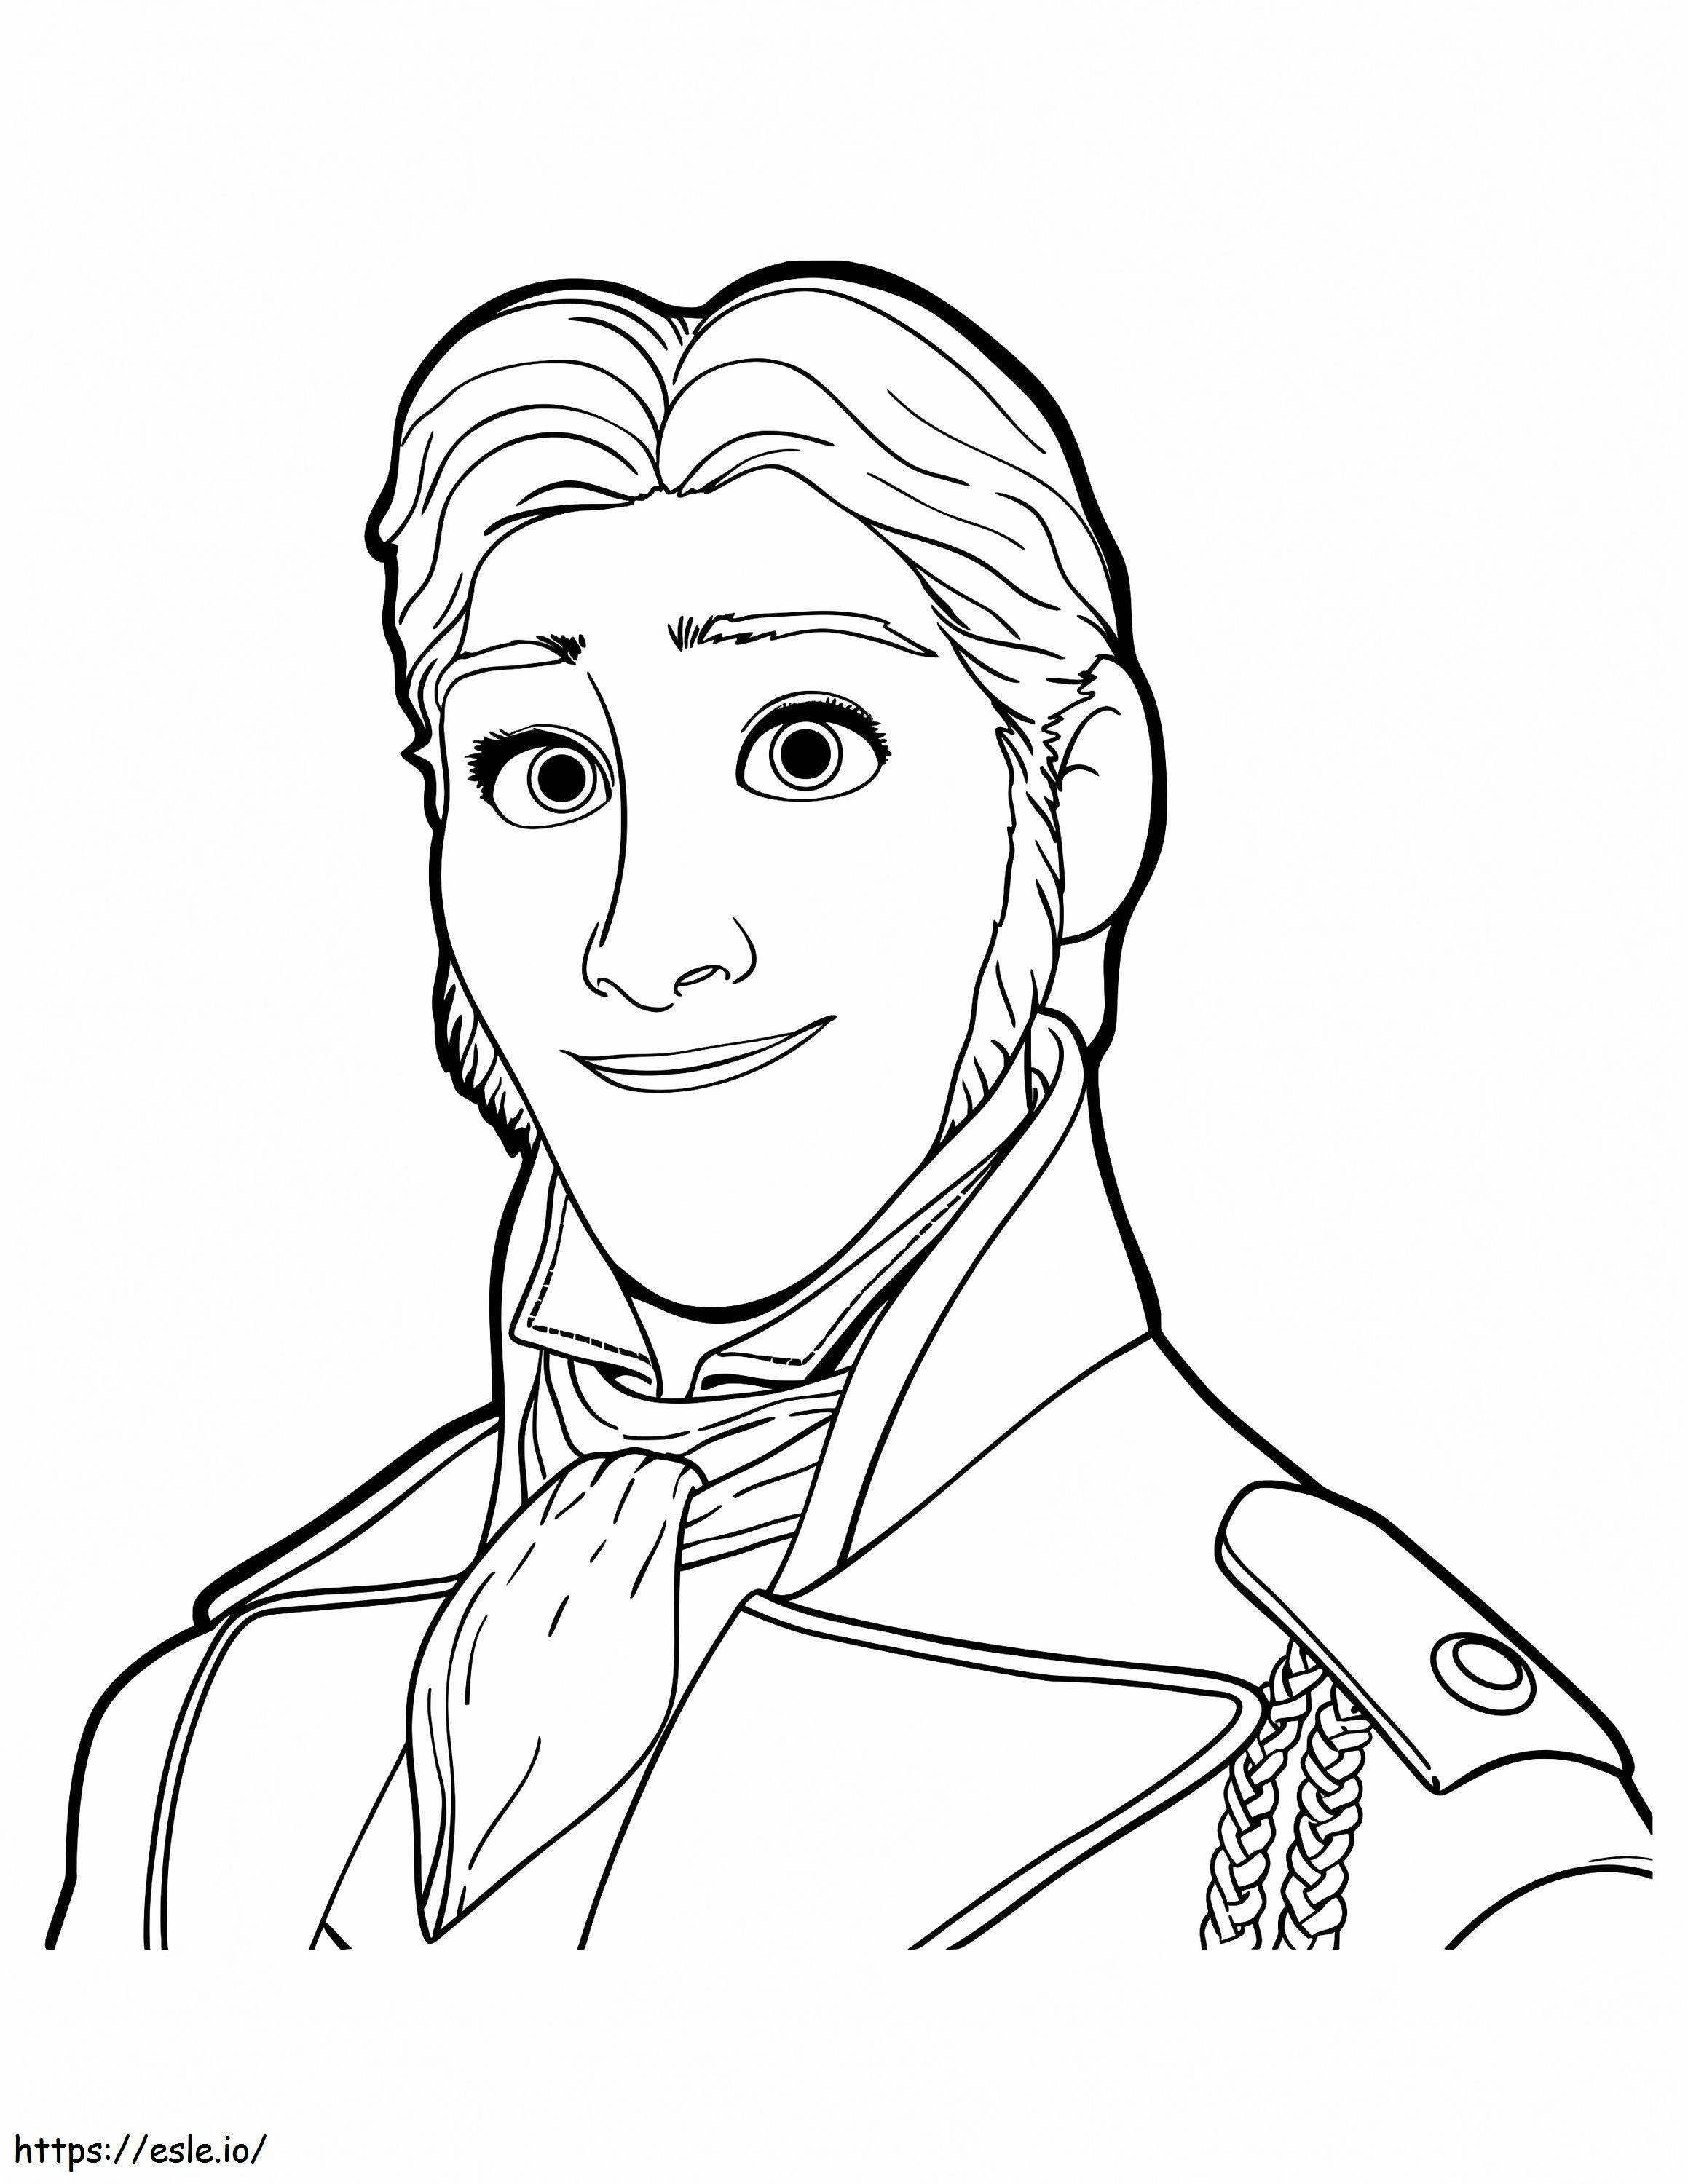 Hans Smiling coloring page